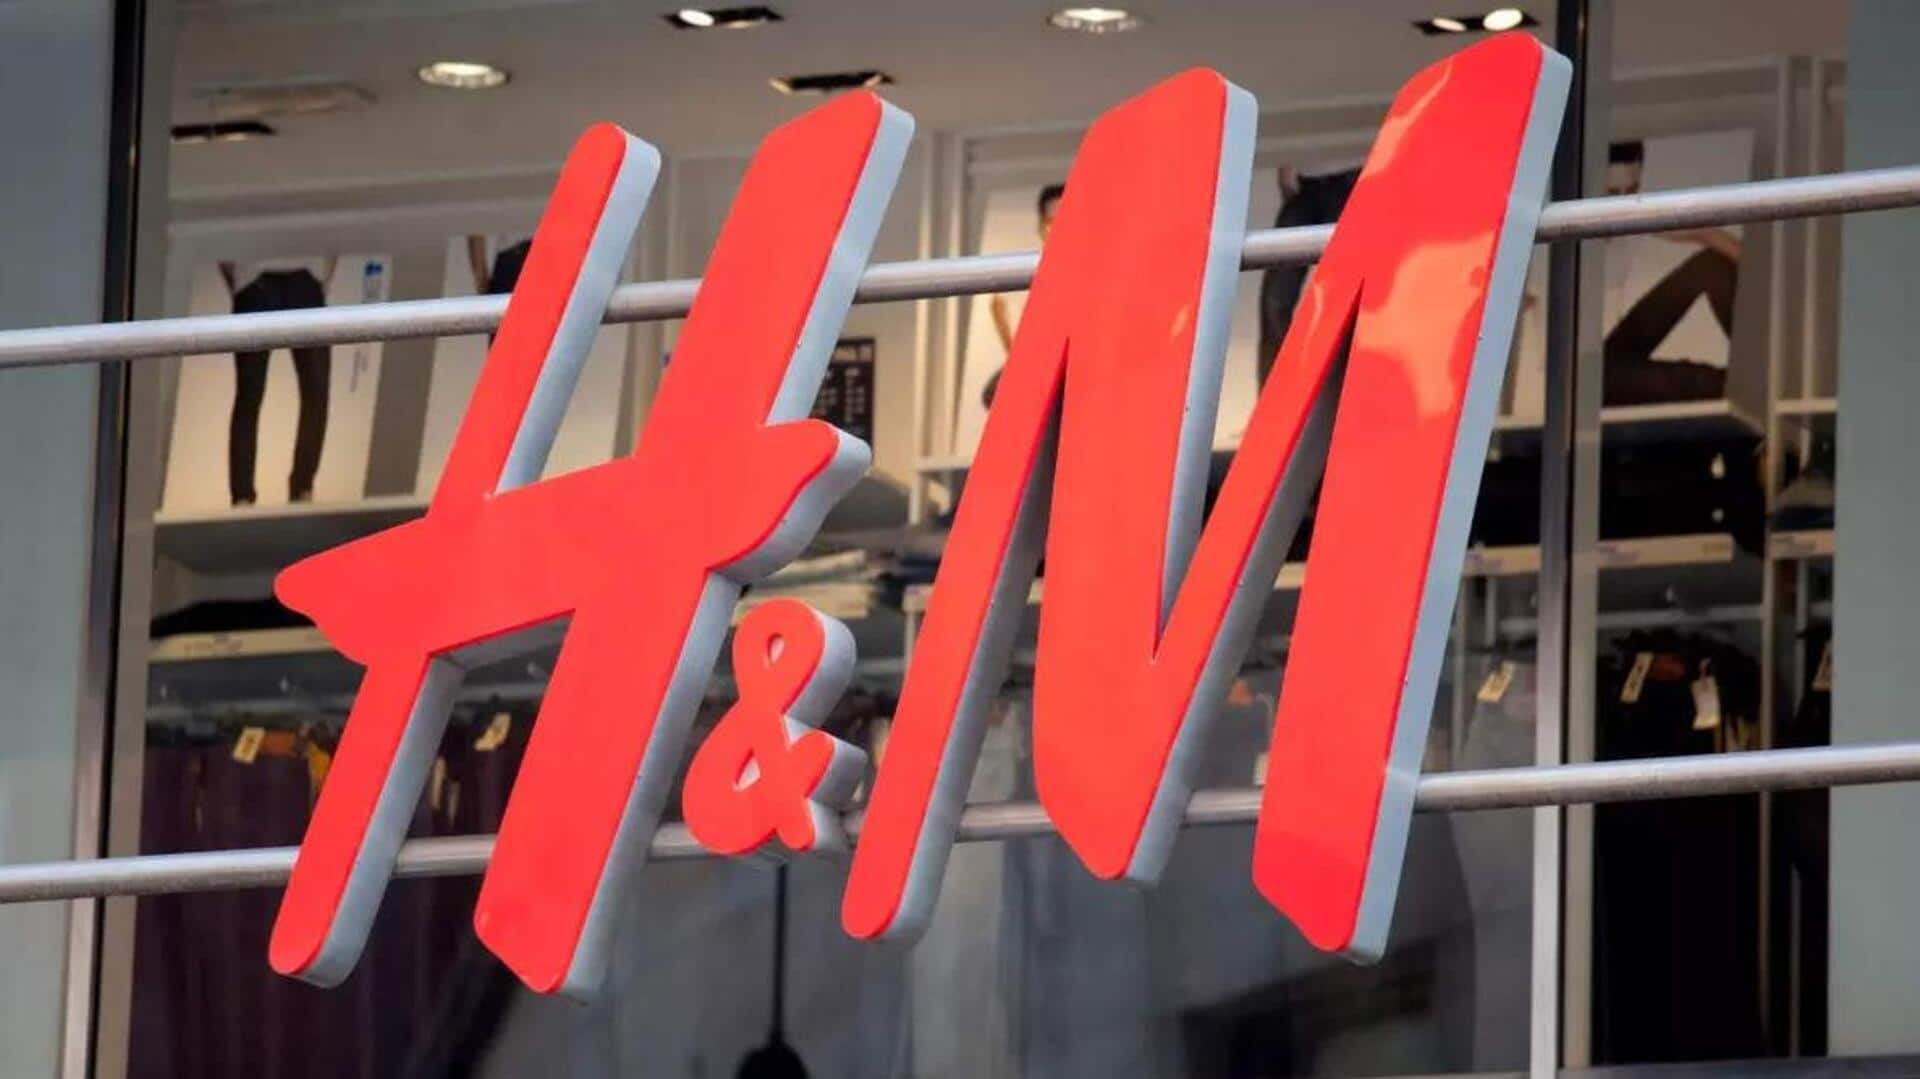 After Zara, H&M to sell second-hand clothes: Here's why